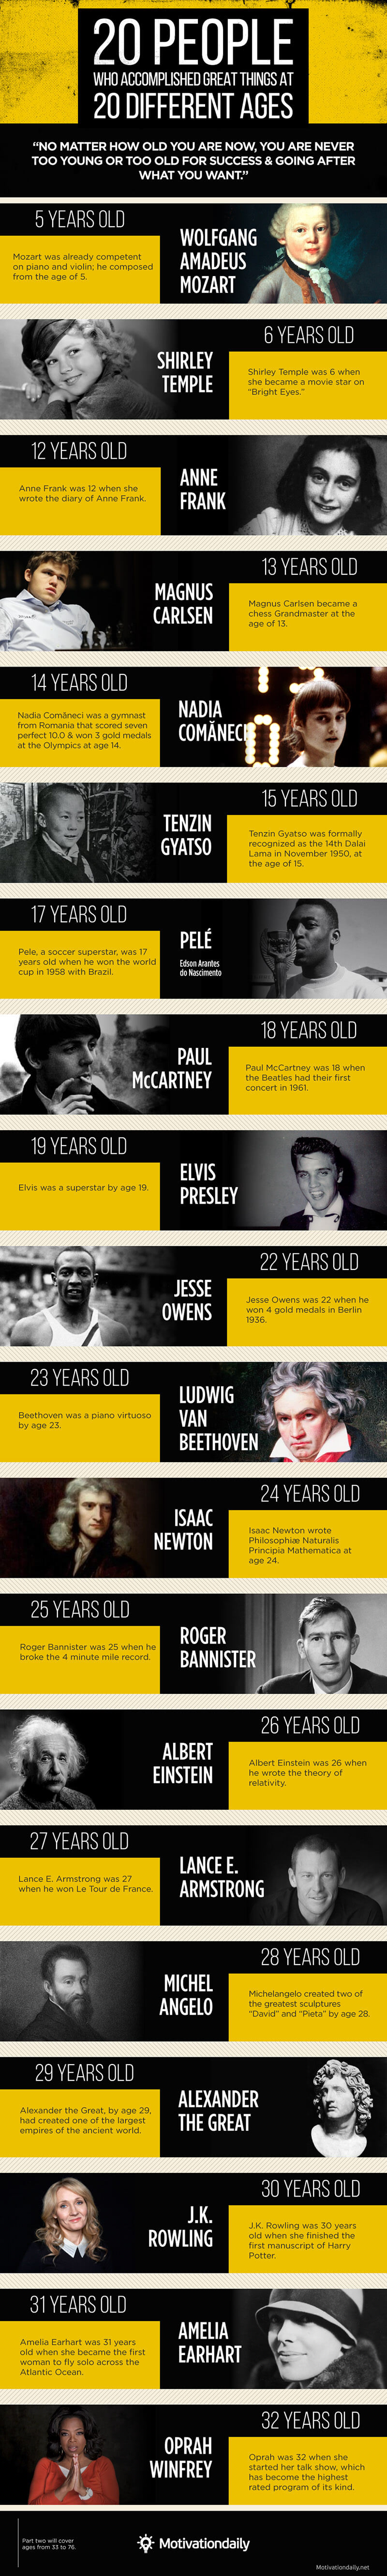 20 People Who Accomplished Great Things At Different Ages